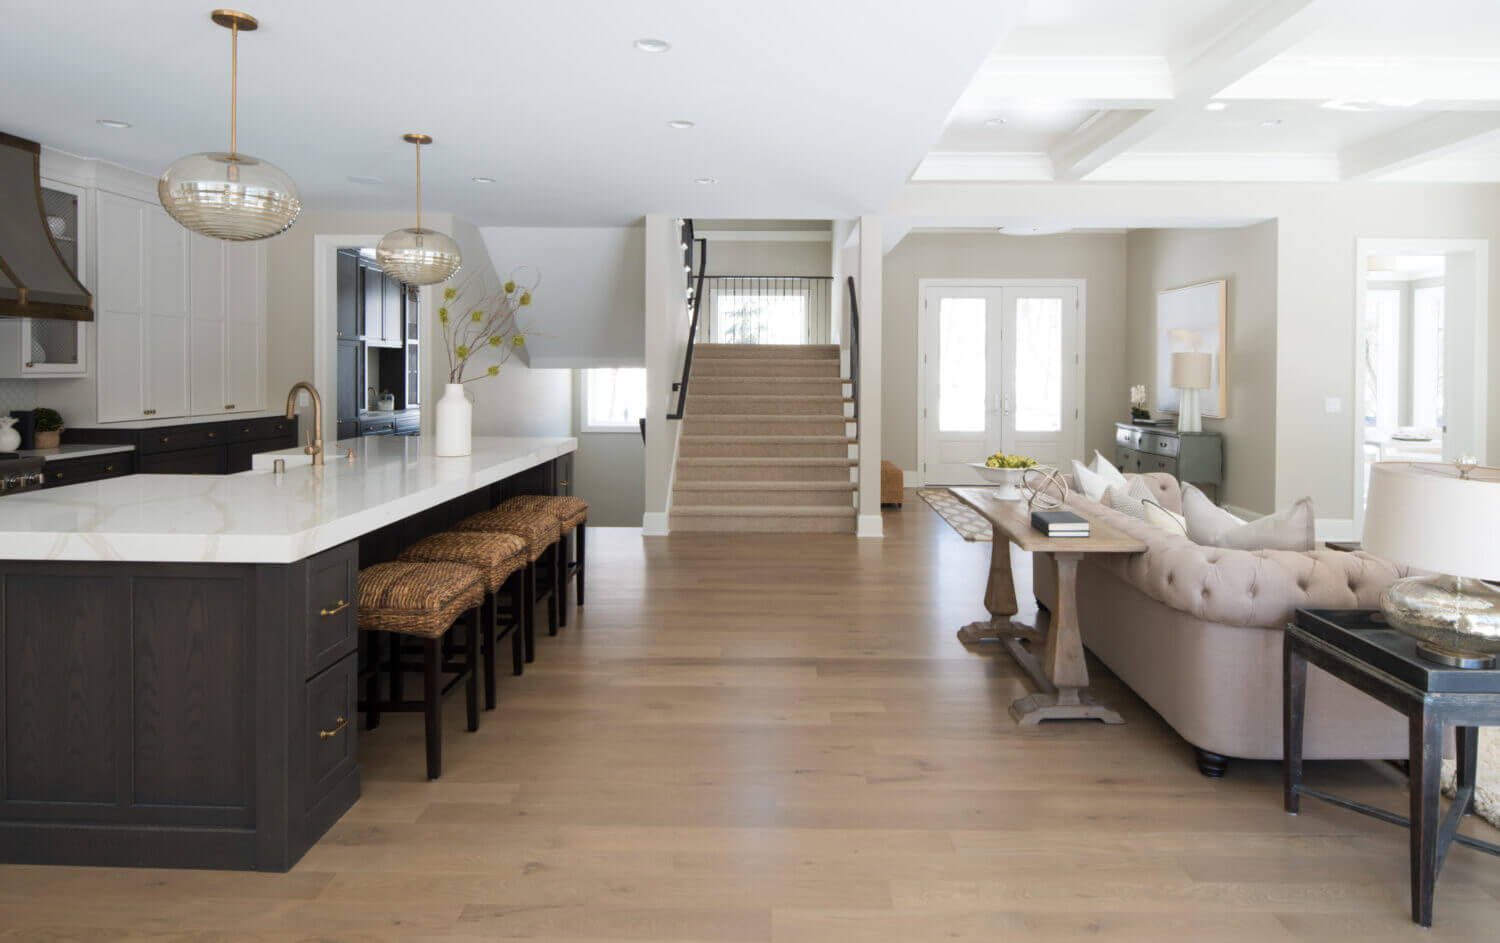 The kitchen island is the hub of the home. It sits along the main traffic walkway from two set of stairs and the traffic from the front door and living room.